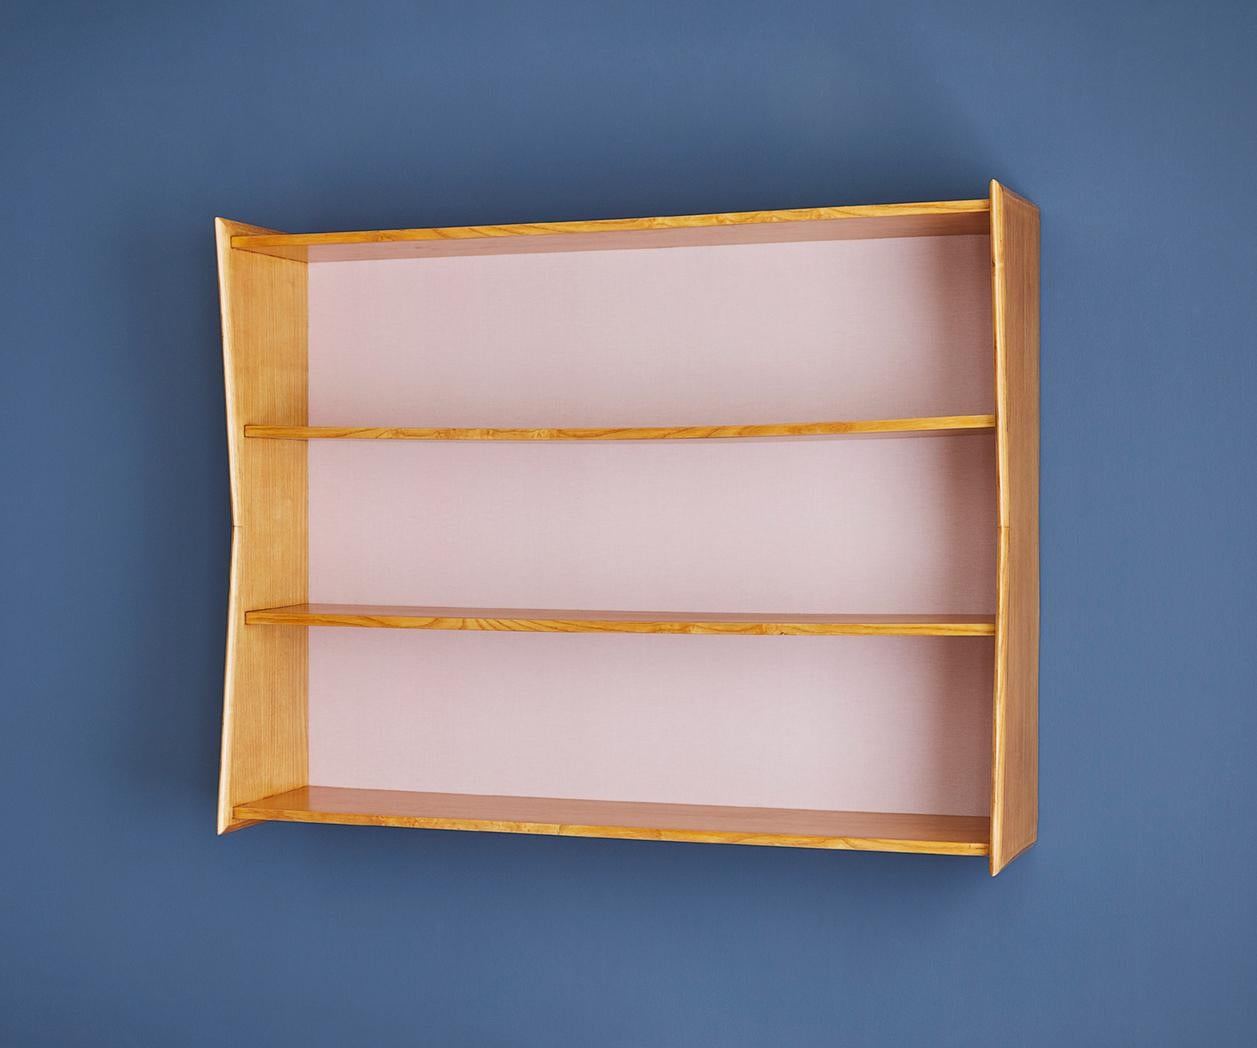 Italy, 1950s

Bookshelf in maple with pink textile.

Measures: H 78 x W 106 x D 25 cm.